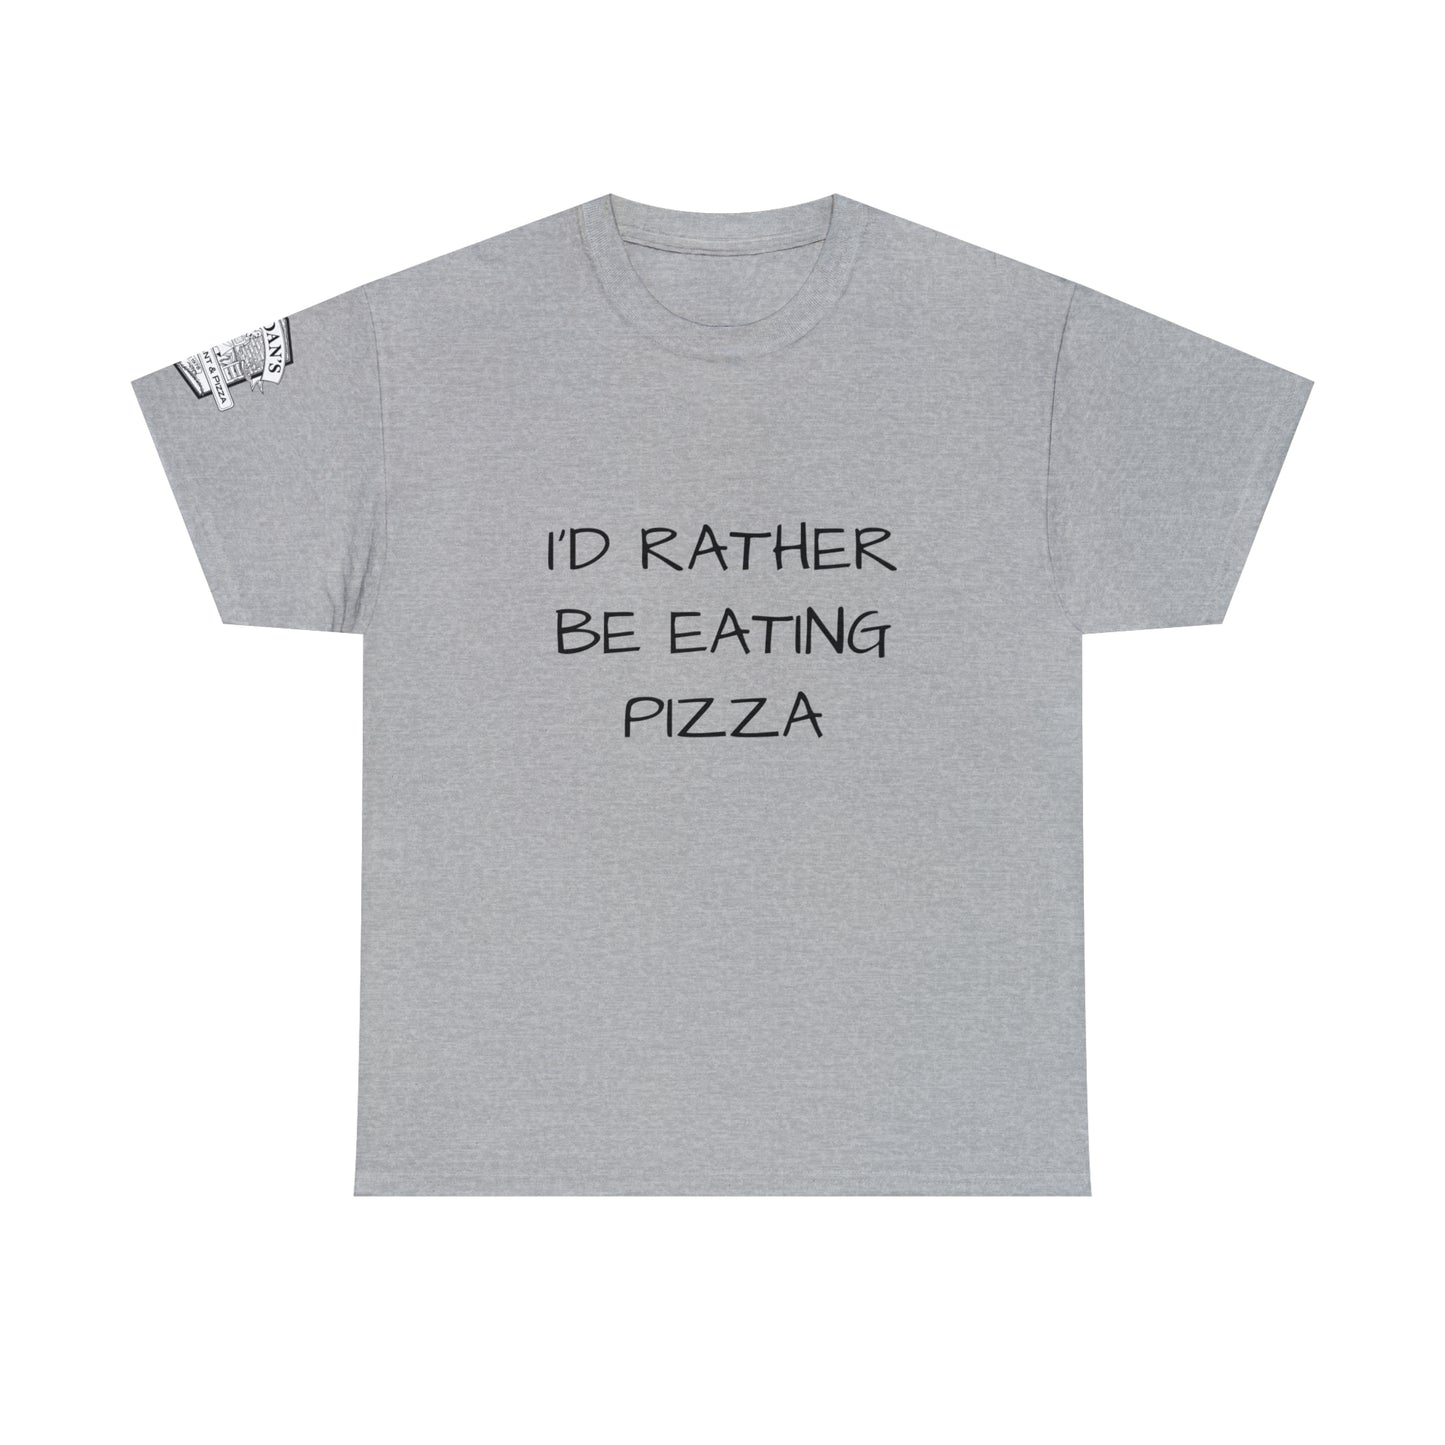 I'd Rather Be Eating Pizza - Adult T-shirt